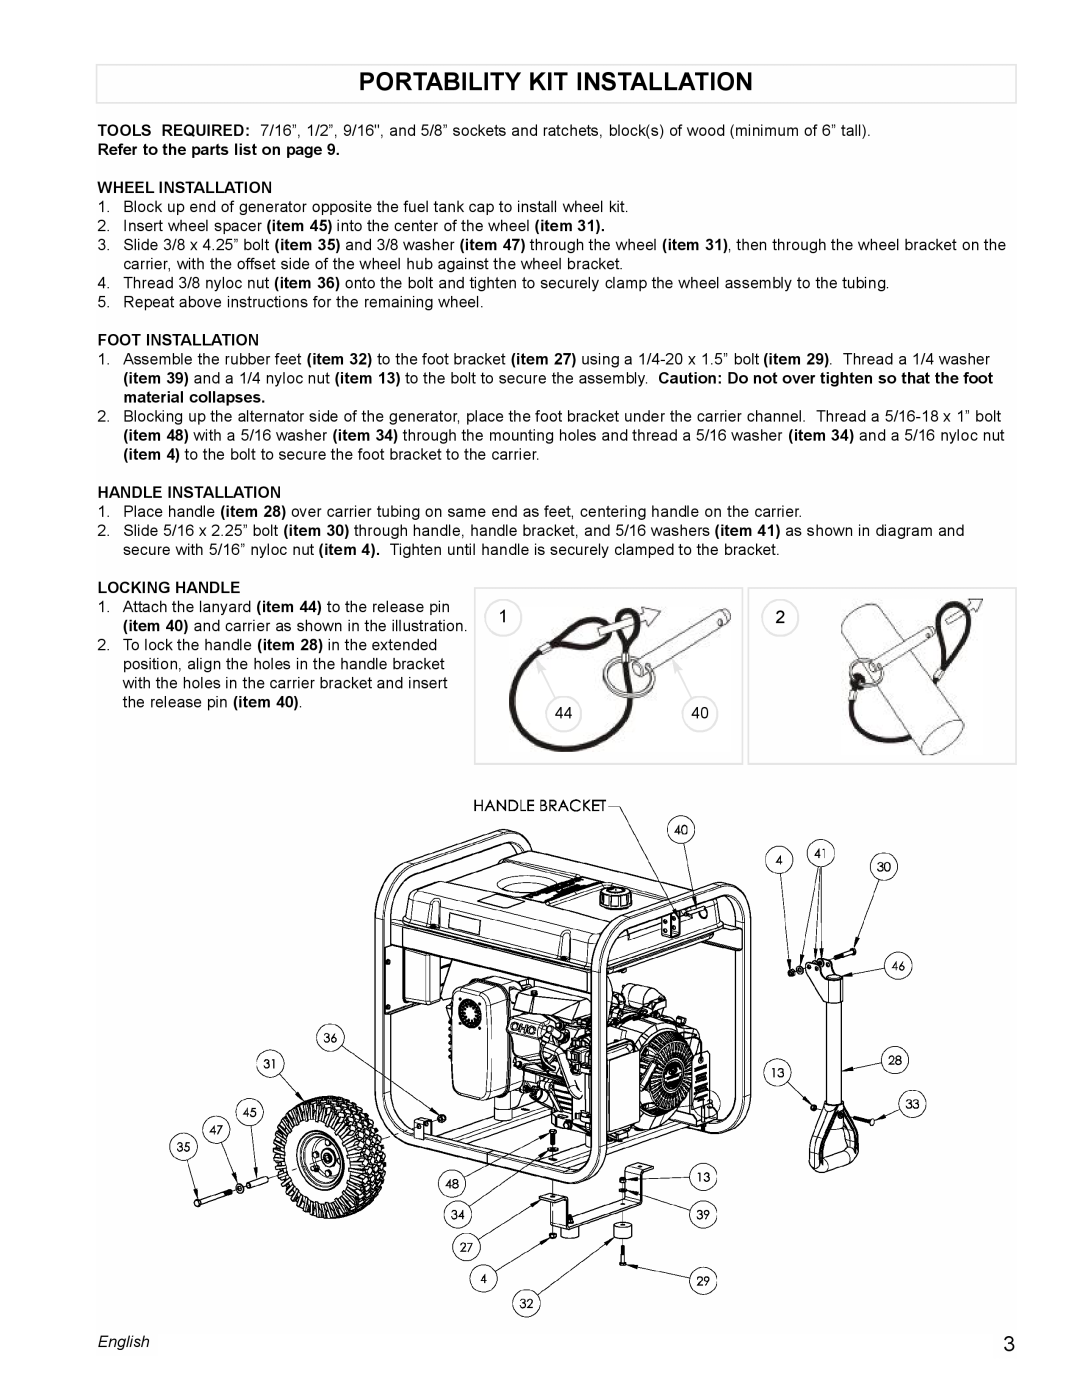 Powermate PM0435004 Portability Kit Installation, Refer to the parts list on page WHEEL INSTALLATION, Foot Installation 